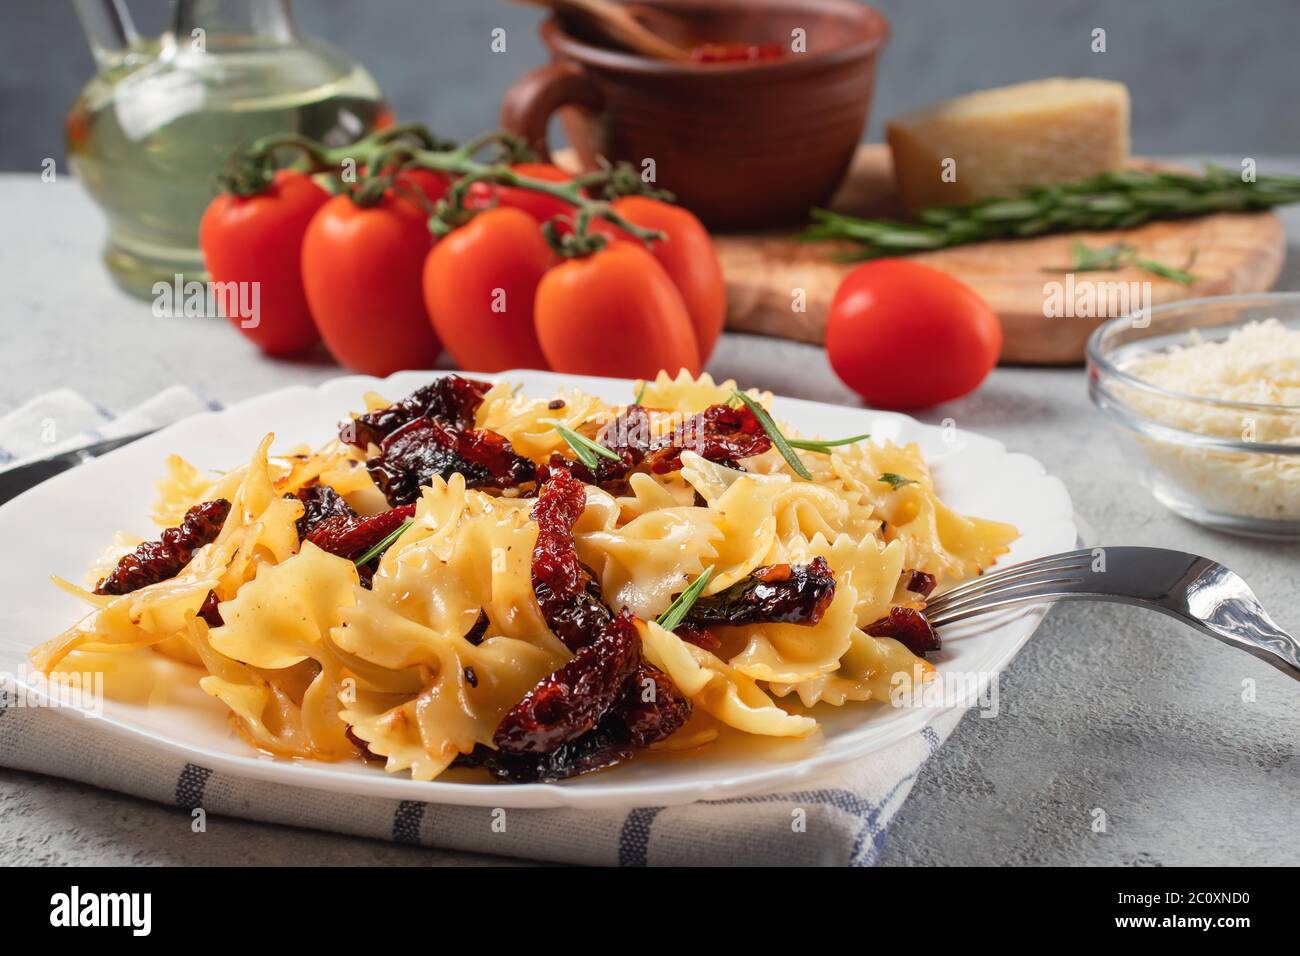 Pasta with sun-dried tomatoes and parmesan in a white plate on the table. Italian cuisine, ingredients and the finished dish. Stock Photo